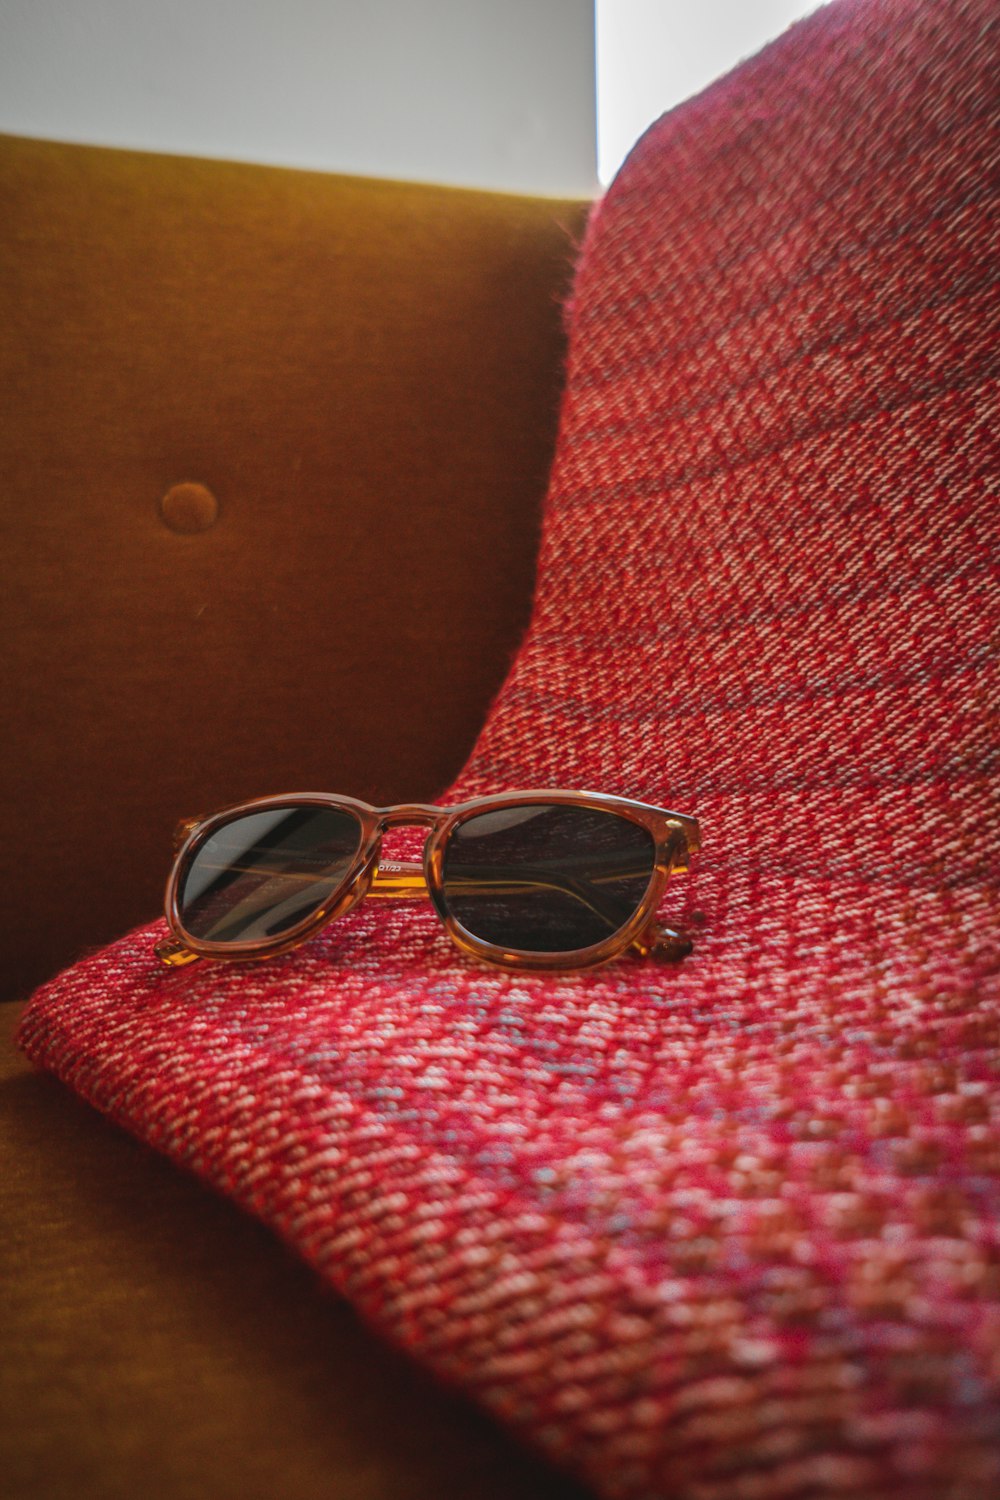 a pair of sunglasses sitting on top of a red blanket